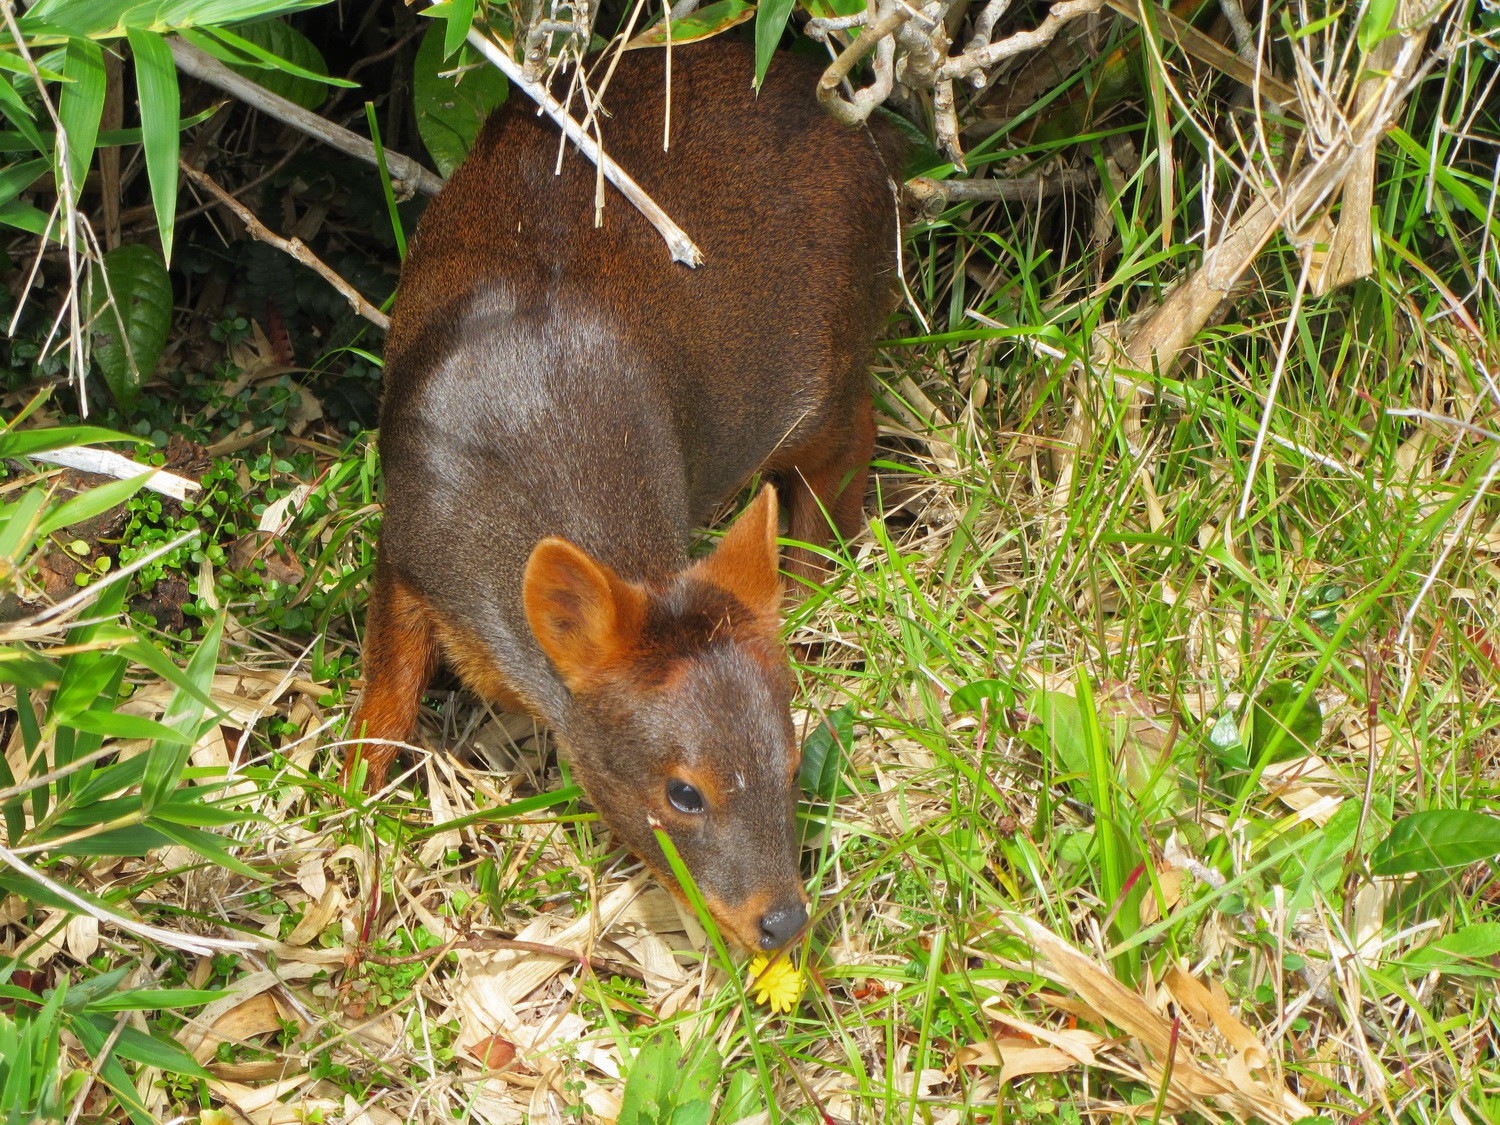 Pudu - Pudu, the smallest deer on earth, is coming out of the bush